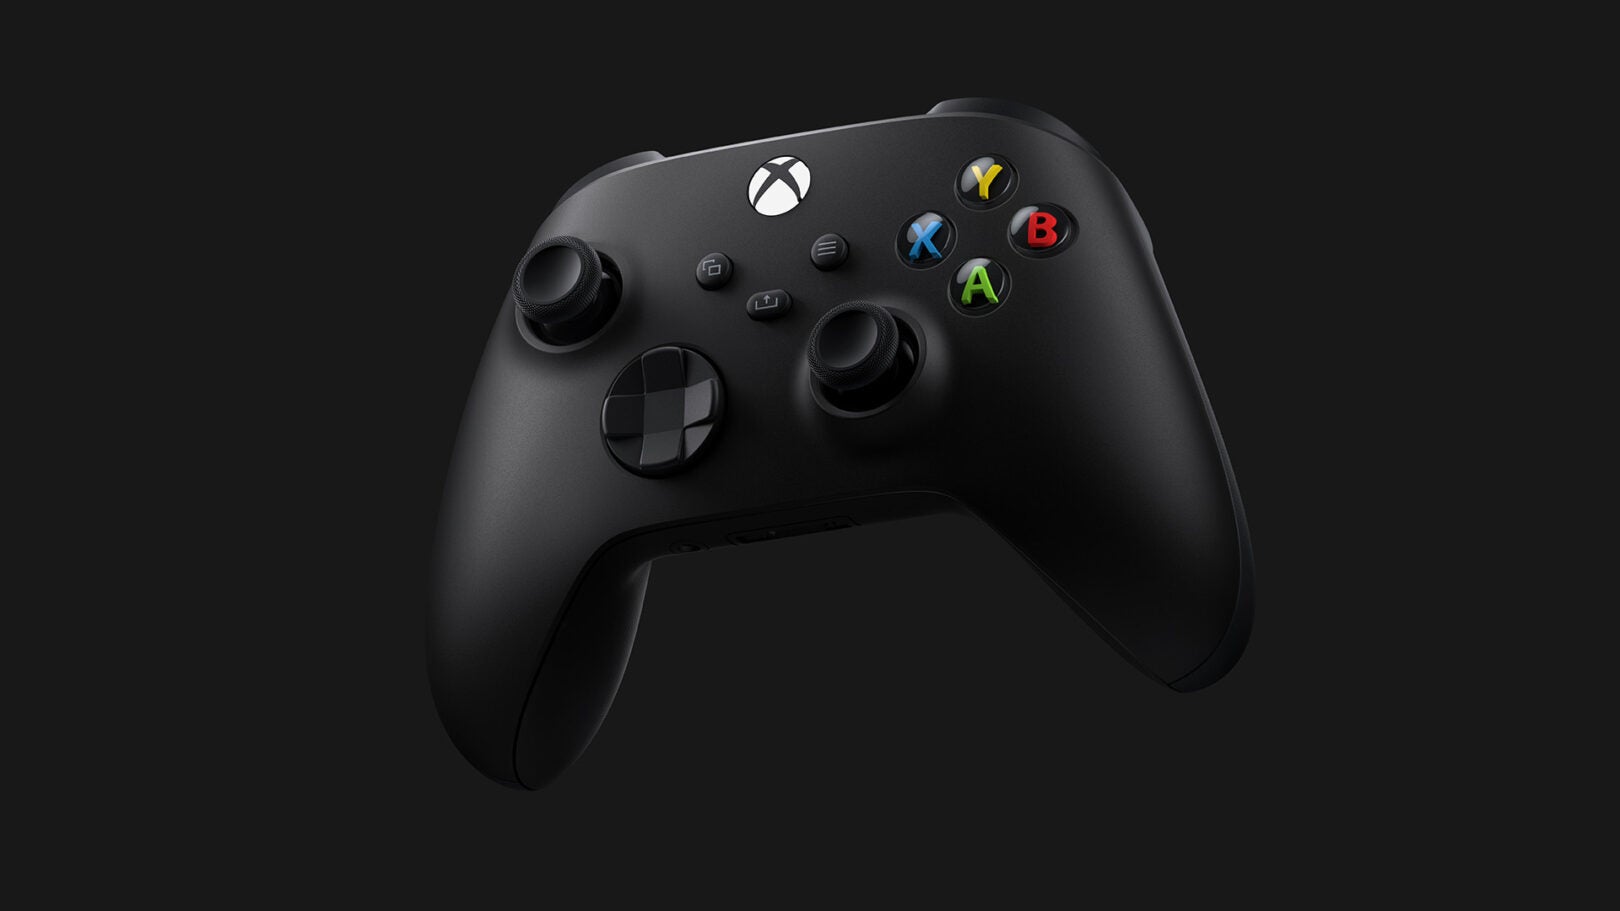 Microsoft begins tests allowing multiplayer without Xbox Live subscription